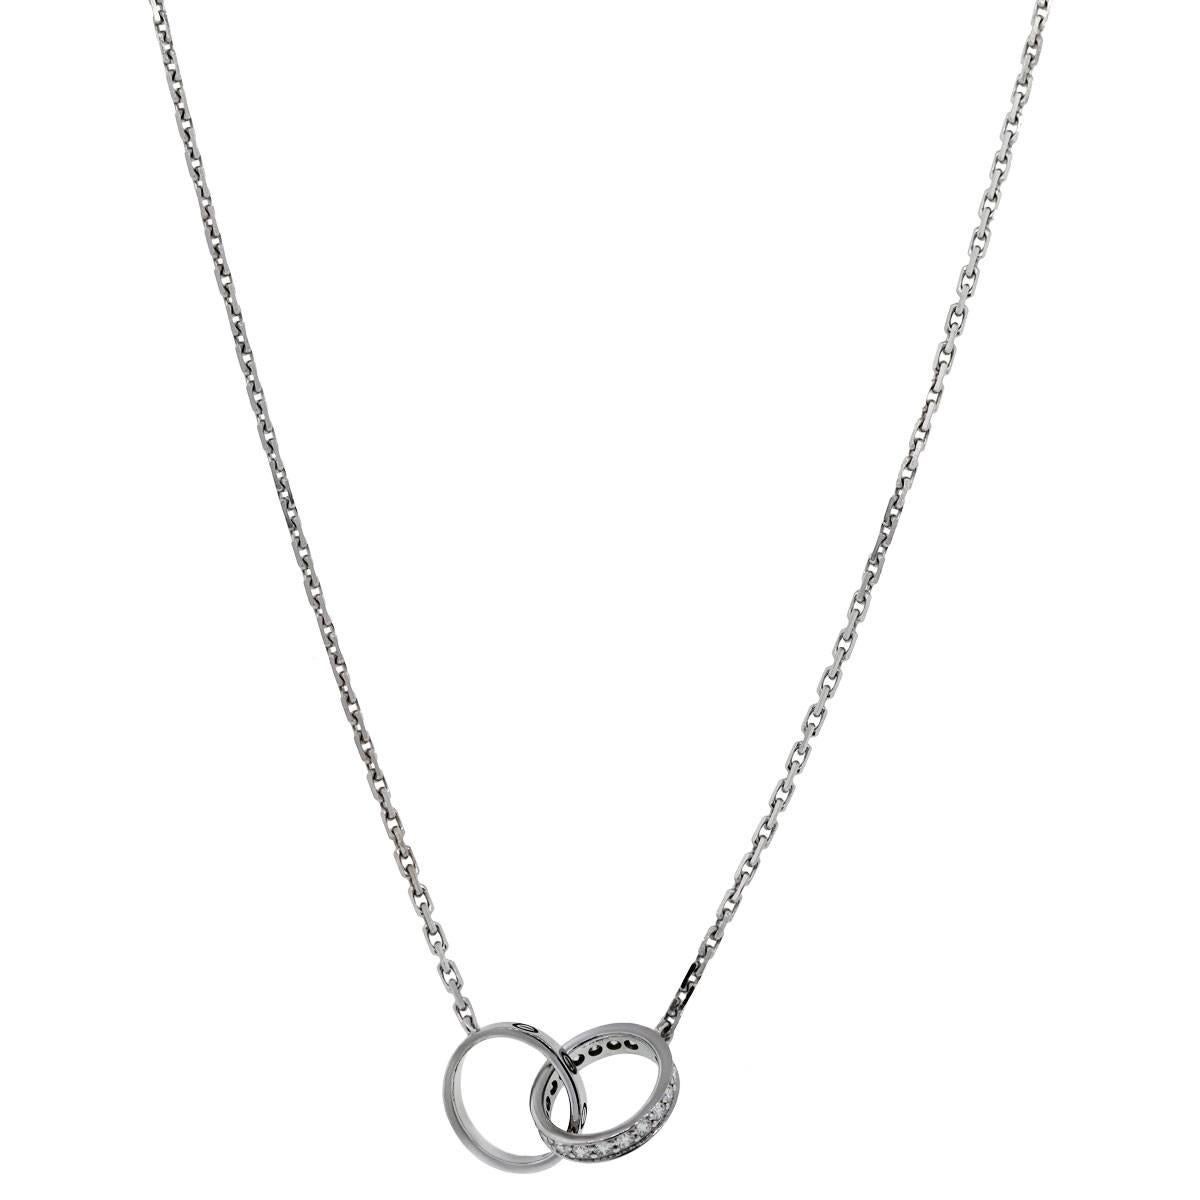 Style: Cartier 18k White Gold & Diamond Baby Love Necklace
Material: 18k White  Gold
Pendant Measurements: 2 Circles, each are approximately 0.38